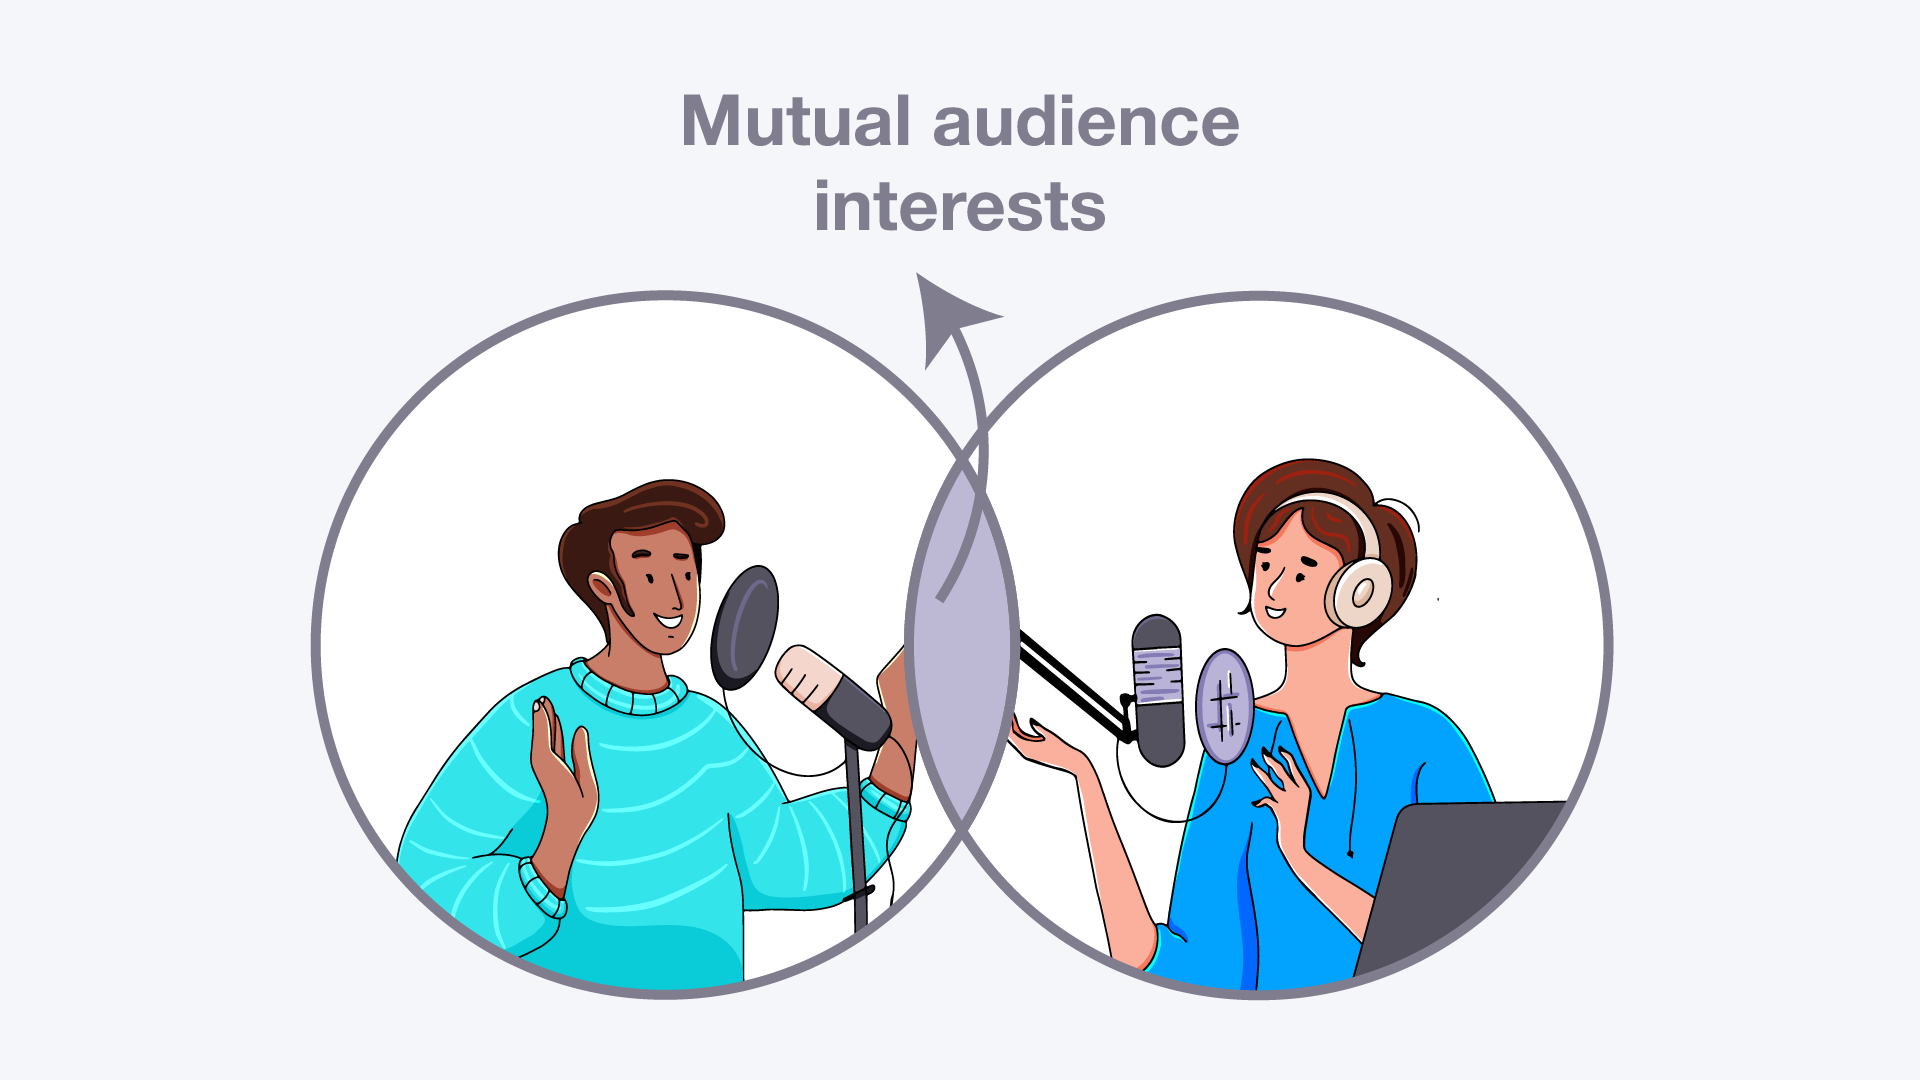 Podcast collaboration is when shows with similar audiences work together